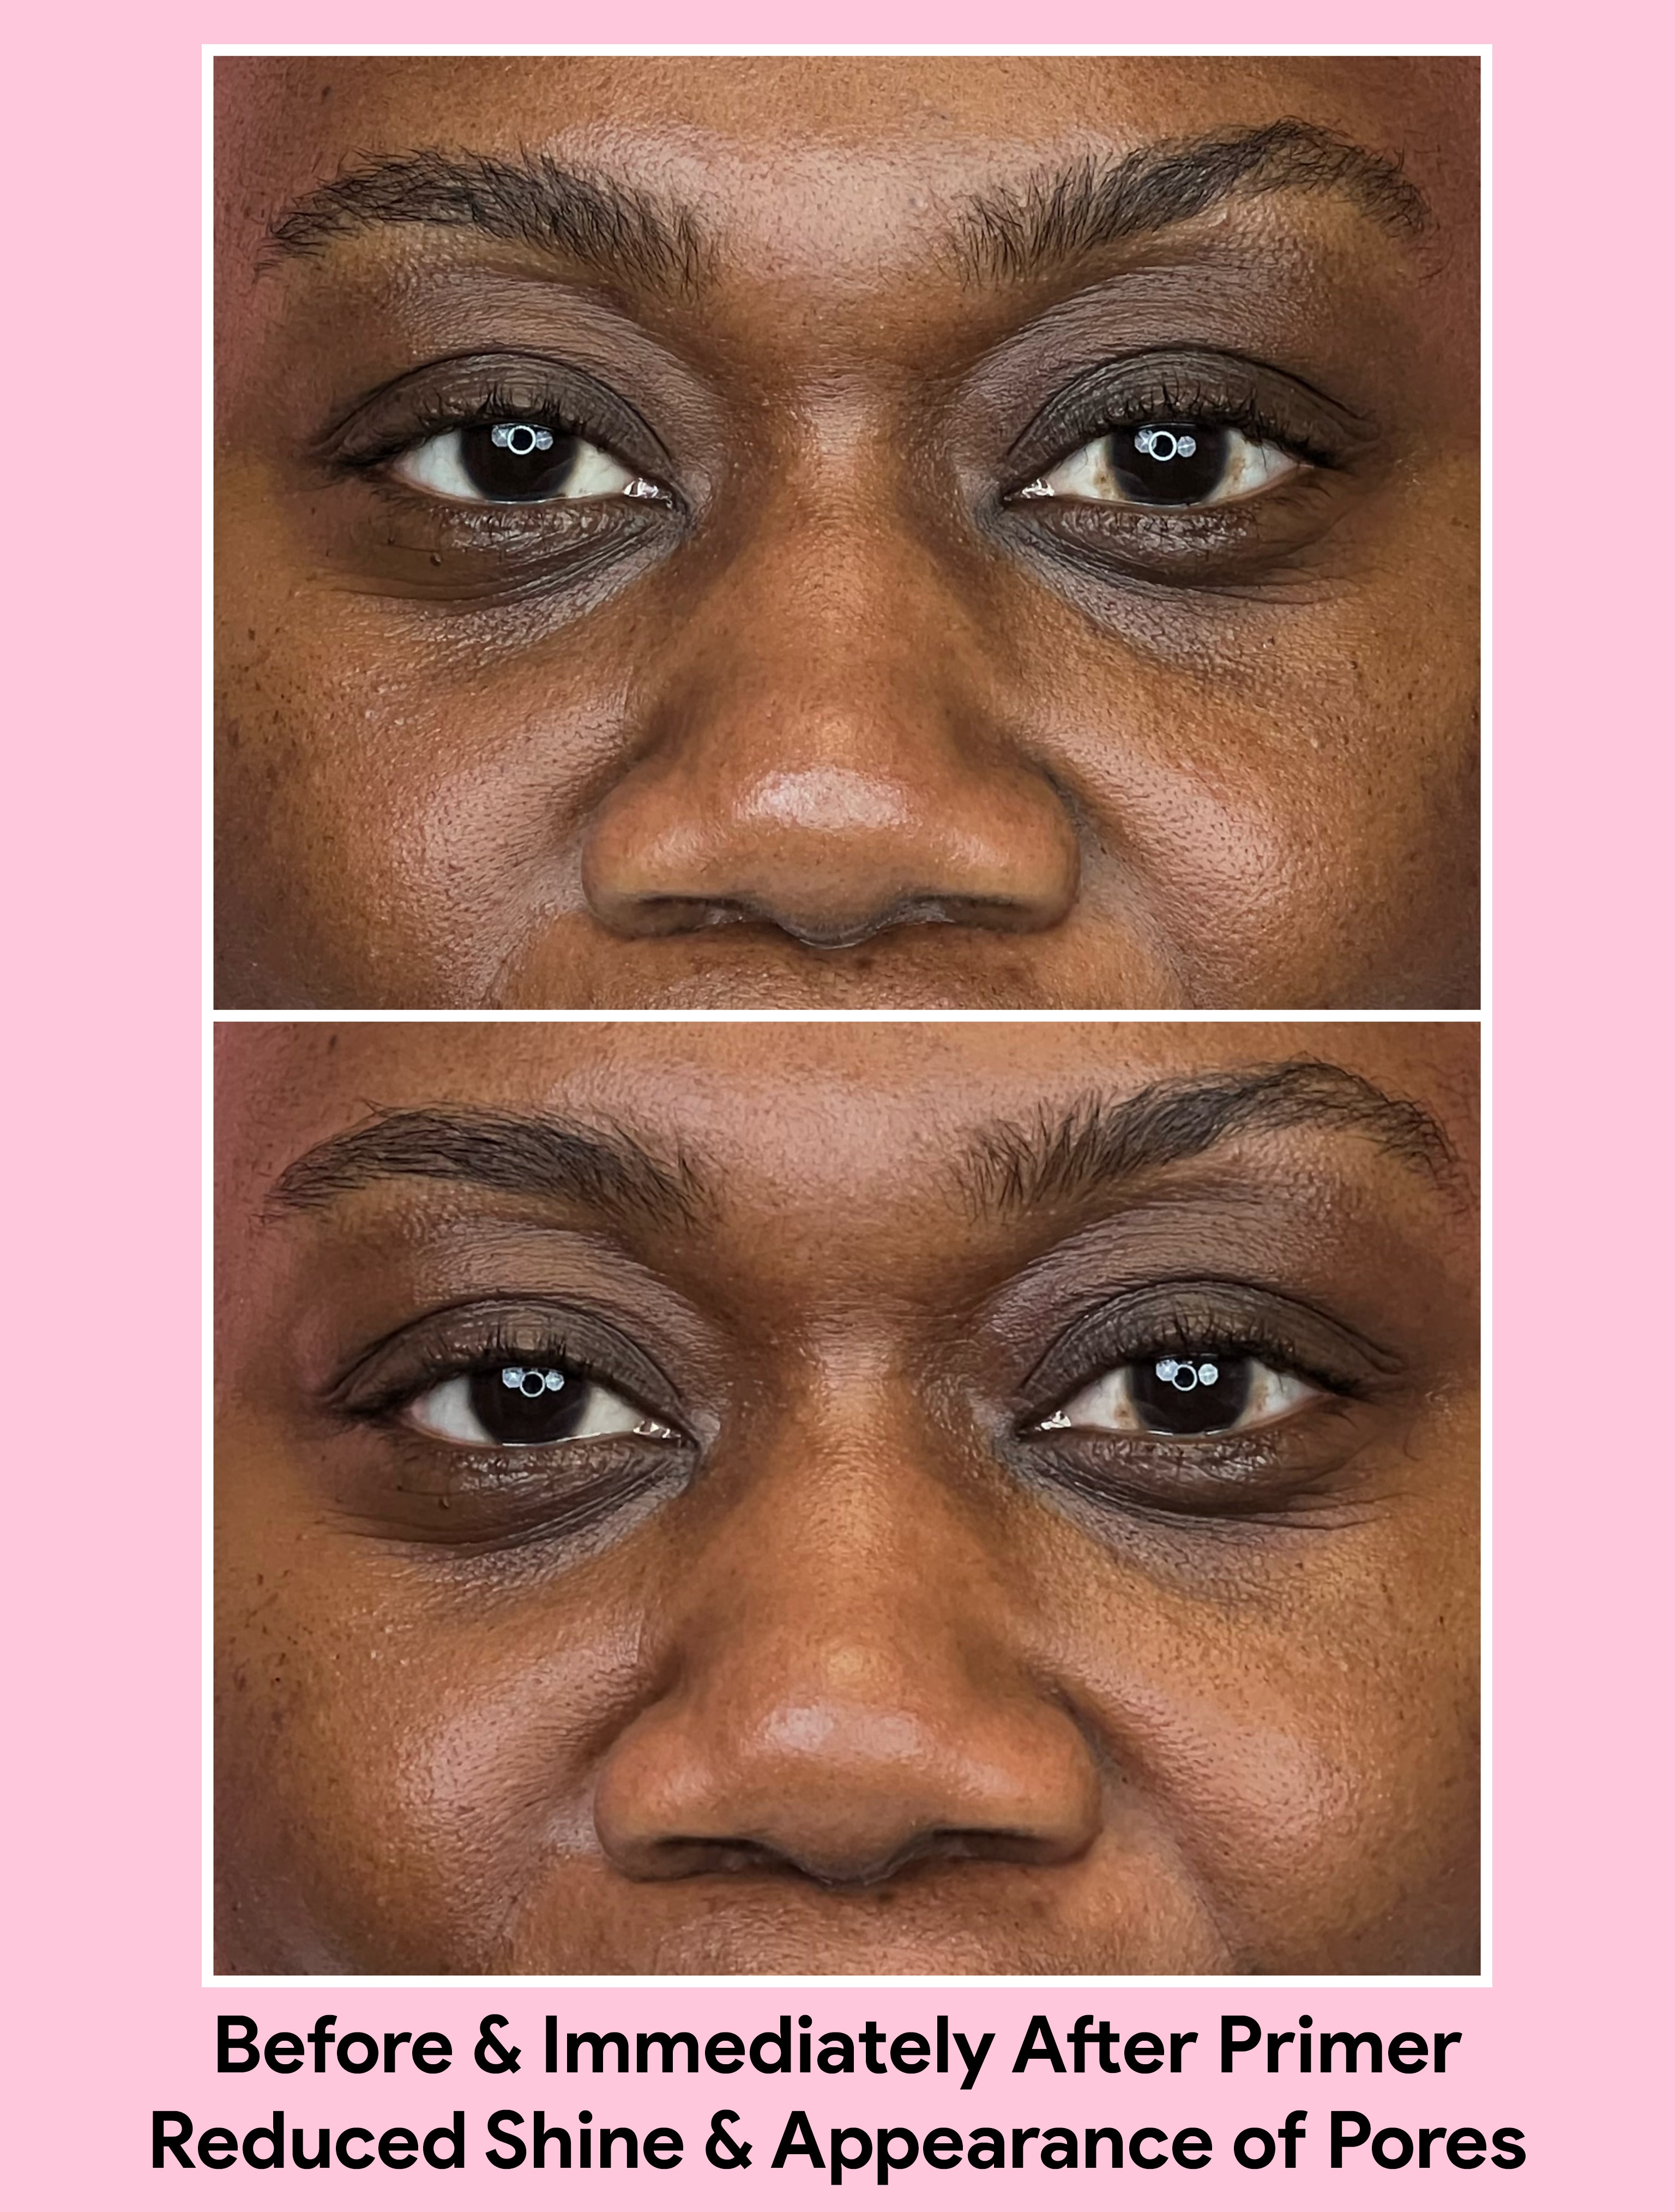 Before and immediately after application of Jori Primer revealing reduced shine and improvement in appearance of pores